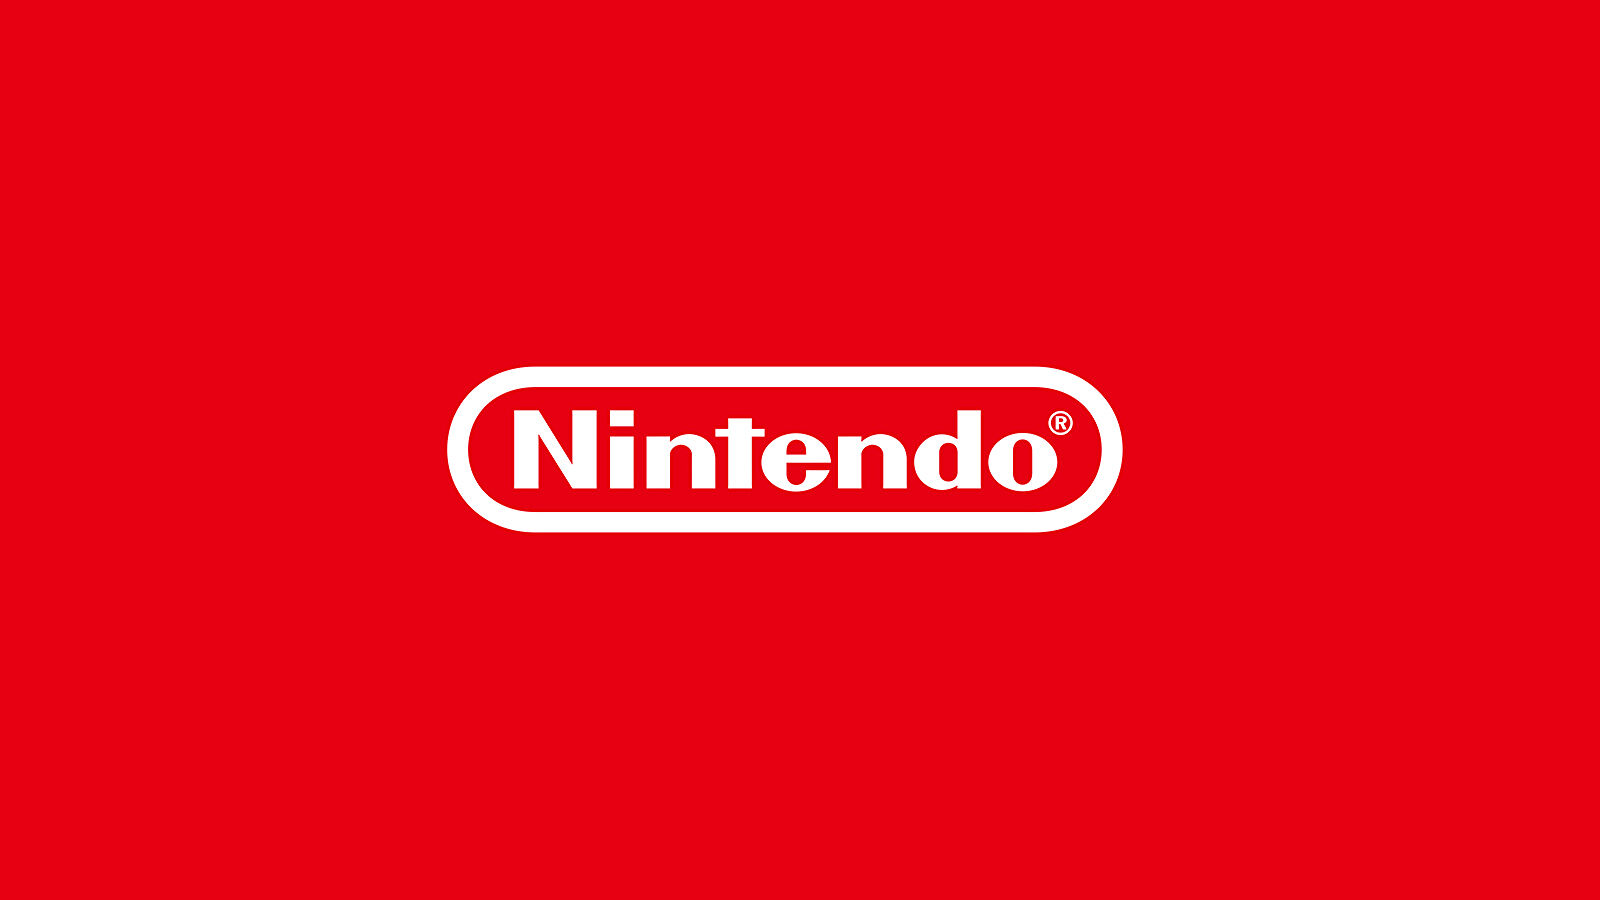 Nintendo contractor concerns "troubling", Doug Bowser says